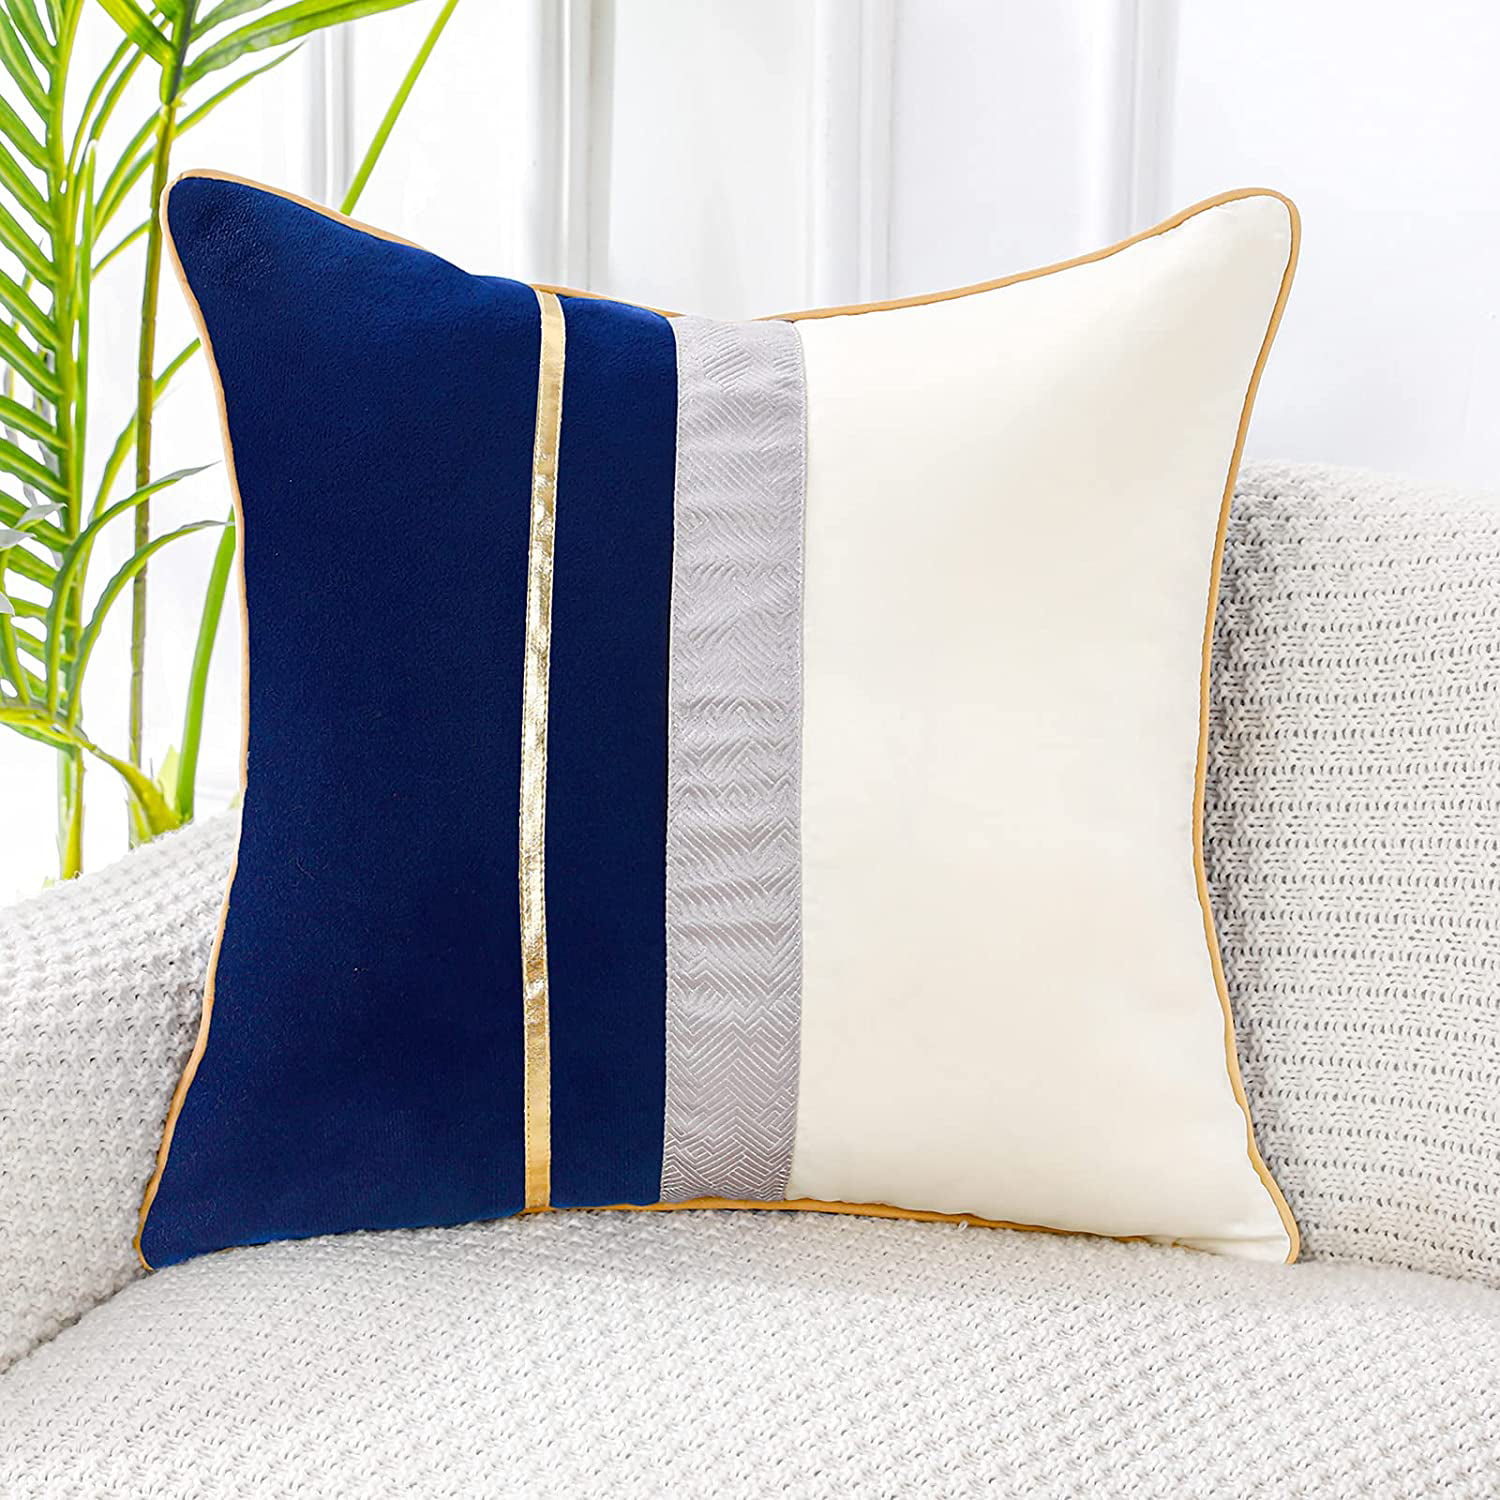 New West Elm Cream Accent Pillow Cover with Silver Stripes 20x20 